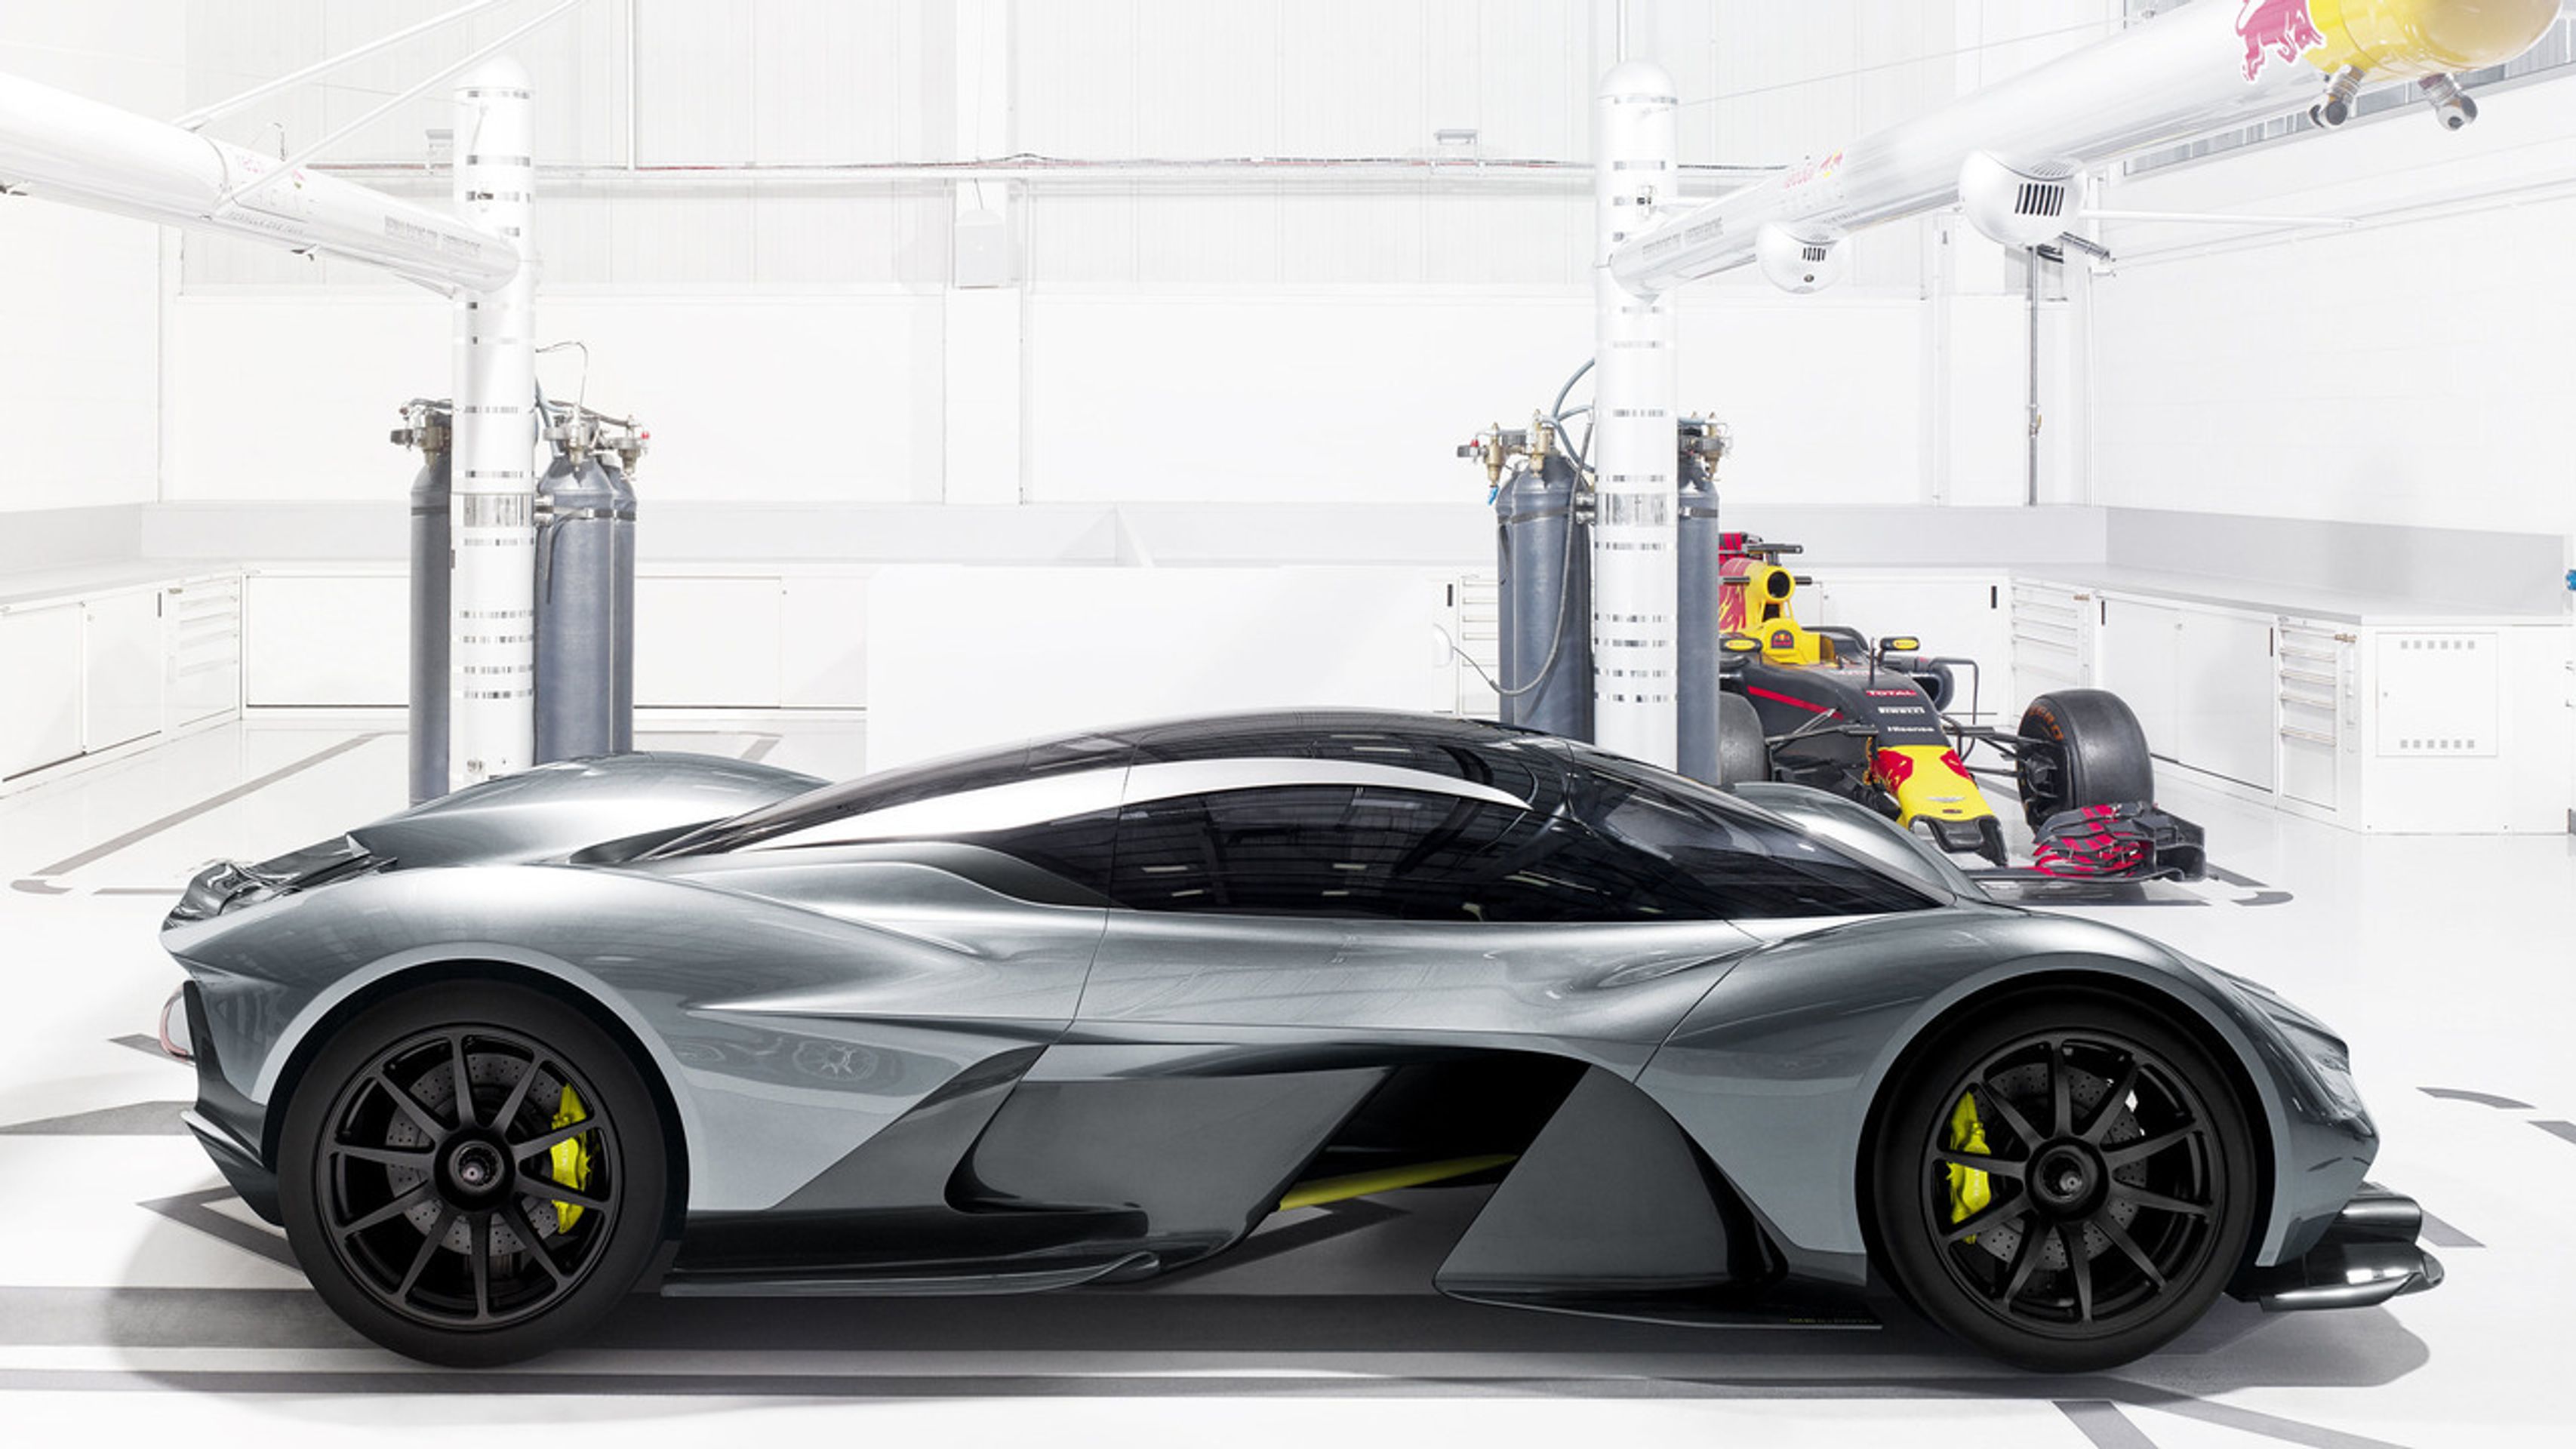 AM-RB 001 - 9 - GALERIE: AM-RB 001 (6/7)